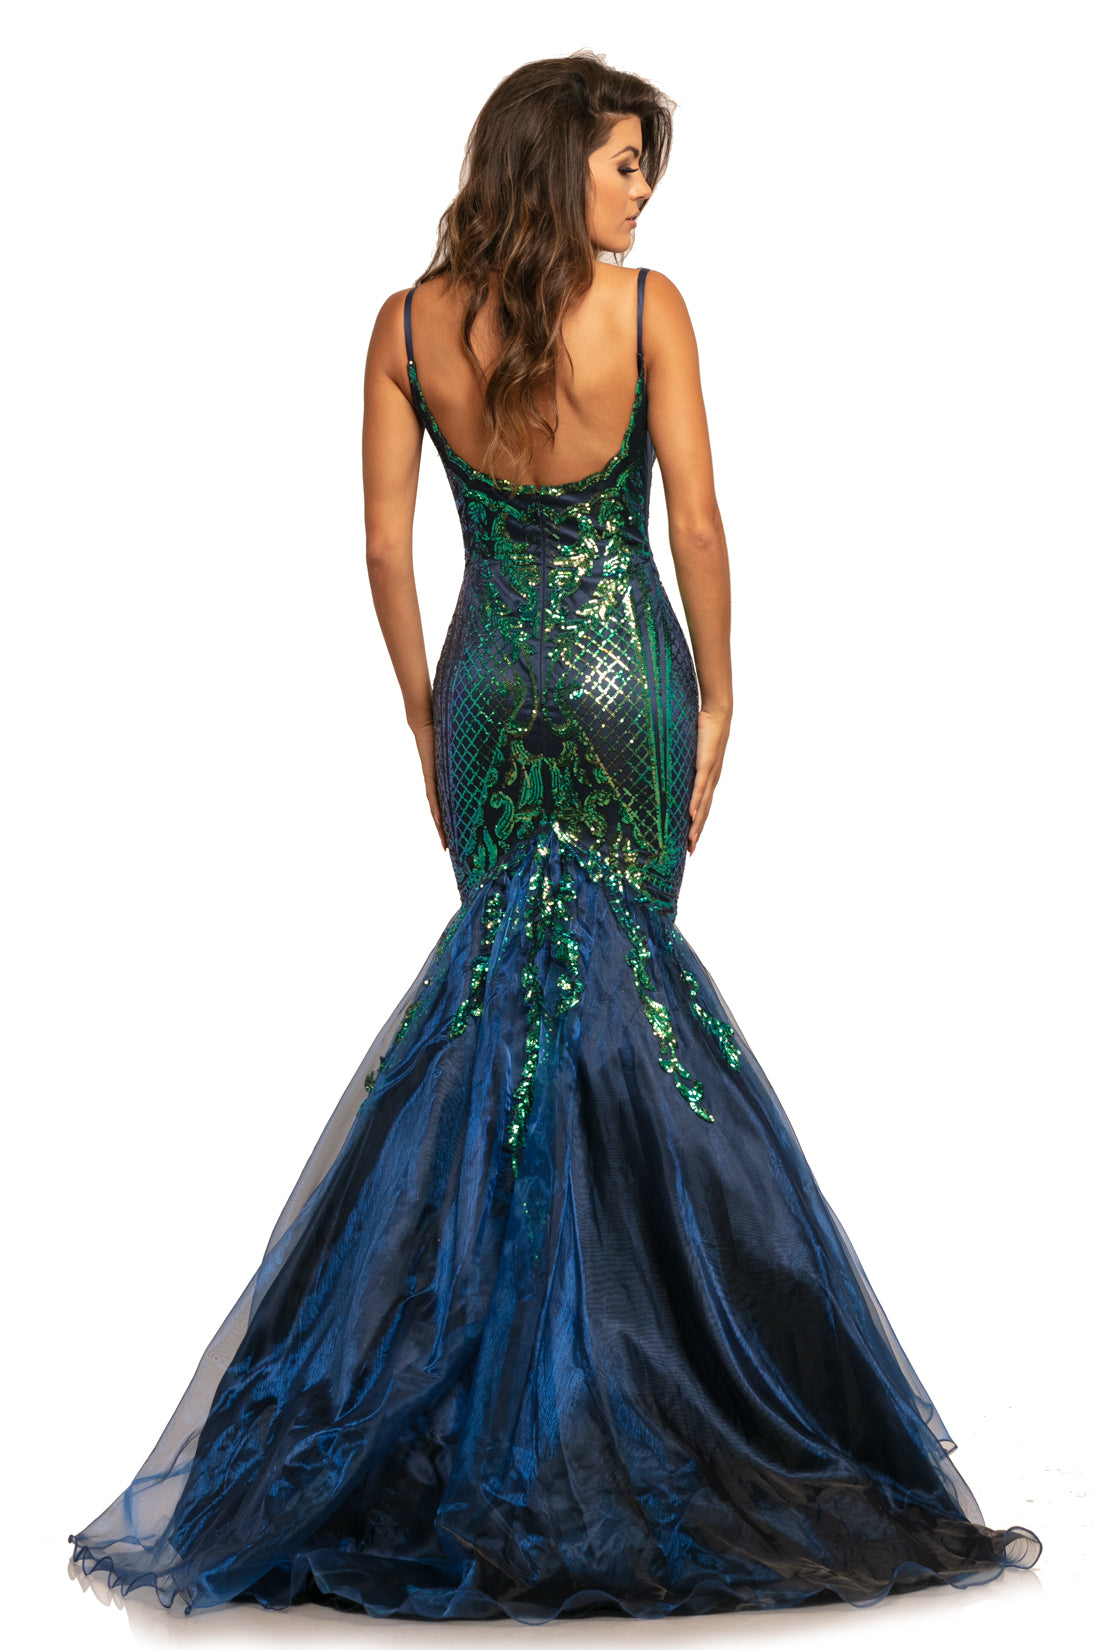 Johnathan Kayne 2018 is a sequin mermaid Prom Dress, Pageant Gown & Formal Evening Wear. Featuring a Sexy Fitted Mermaid Silhouette. High Neckline. Sequin Embellished Bodice with scallop edge. Fit & Flare Leads to a Lush Trumpet Skirt with Iridescent Organza. Sequin Embellishments cascade from the Embellished bodice into the Shimmer Skirt. 